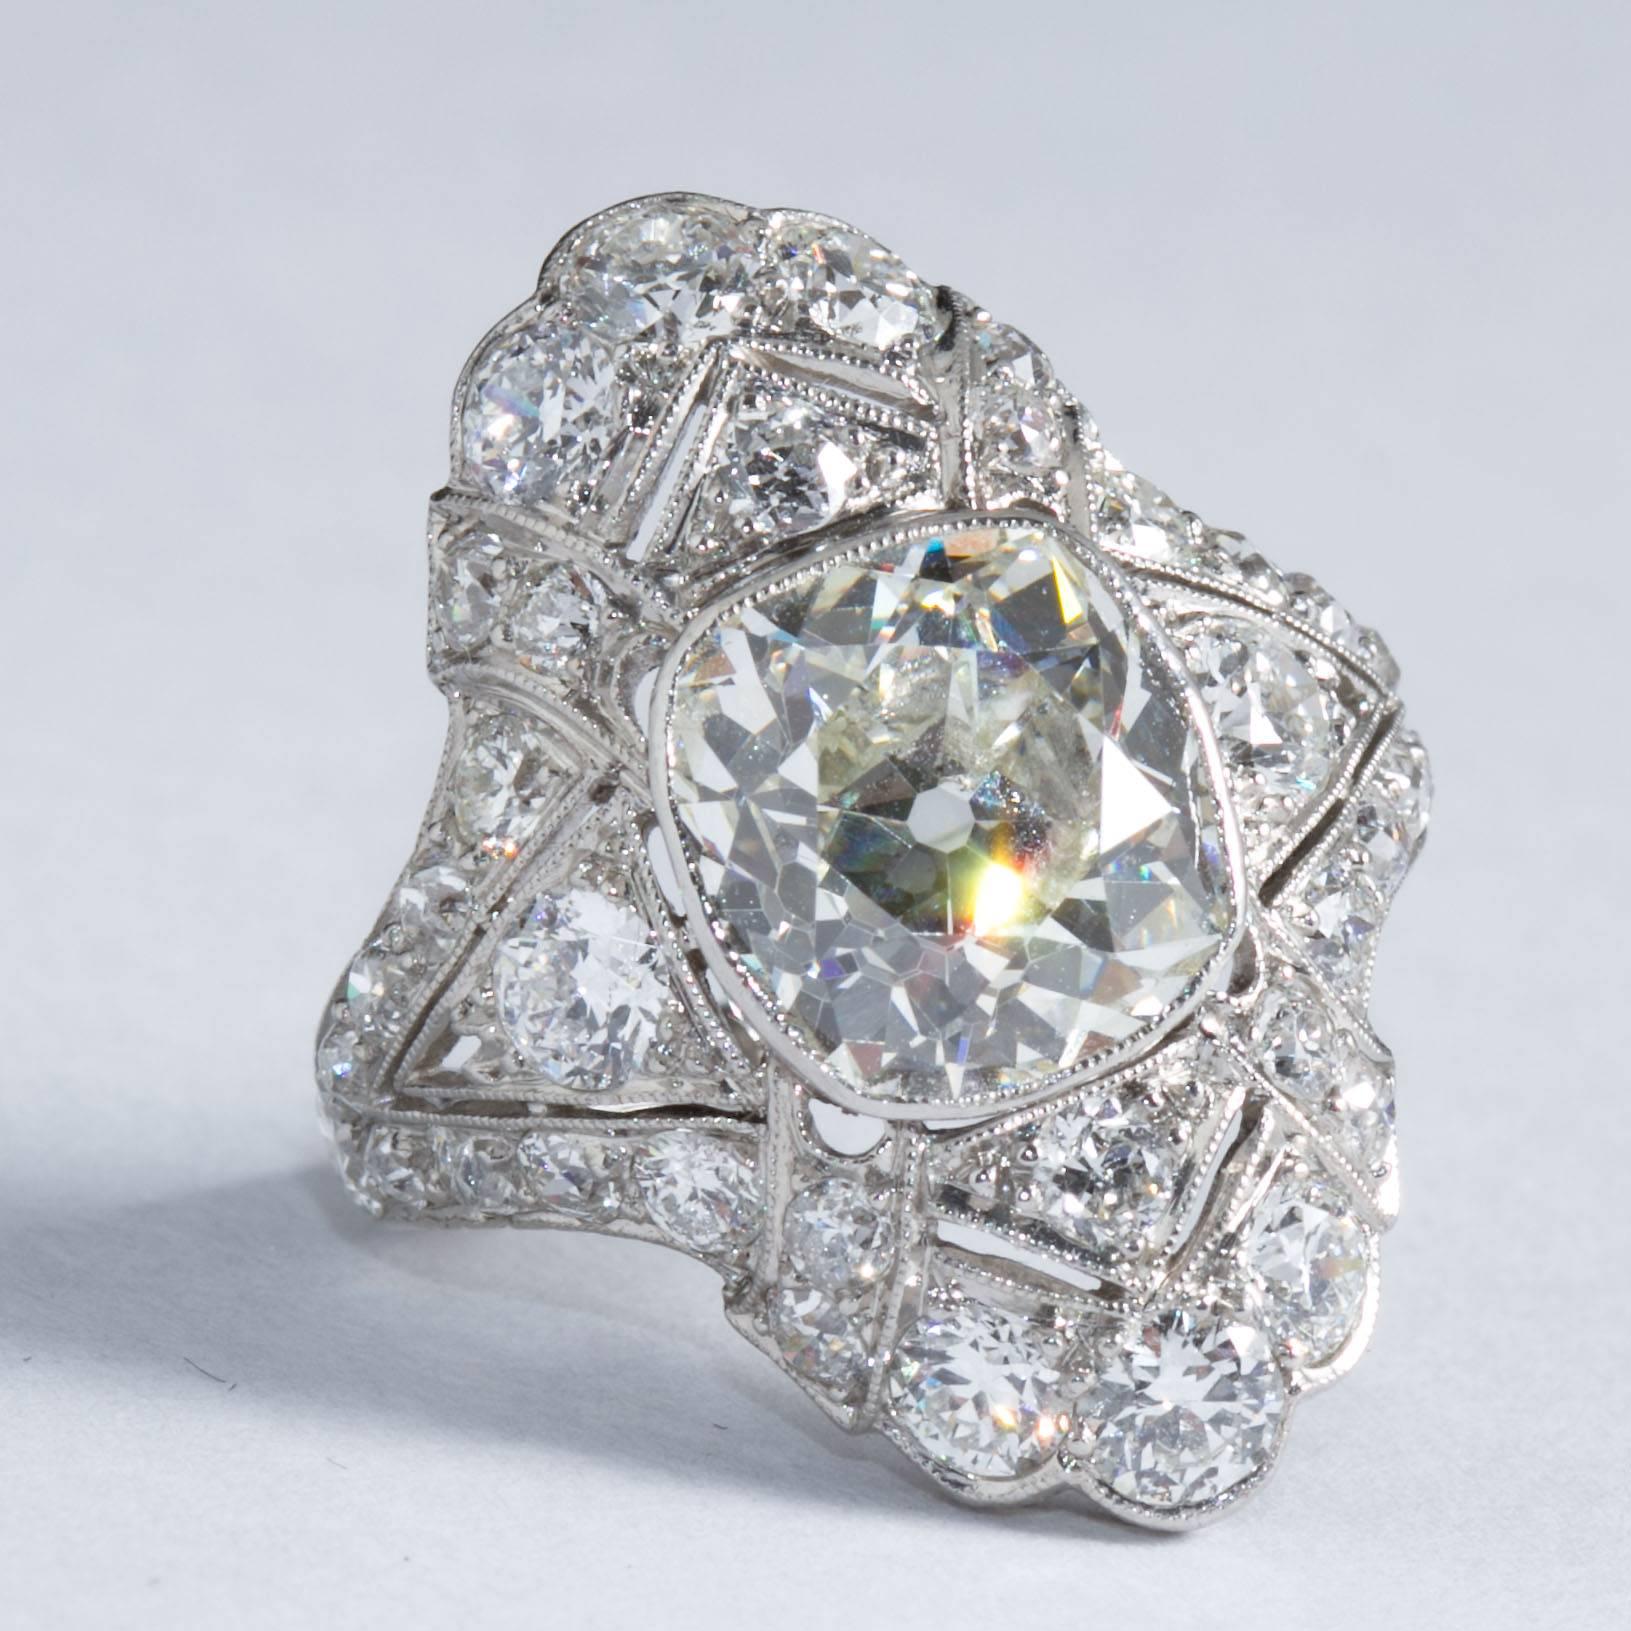 A very fine original navetté style Art Deco ring inlaid with fine diamonds and filigree edging set with a rare center antique cushion cut diamond weighing approximately 4.60 carats.
Diamond is graded according to the Gemological Institute of America